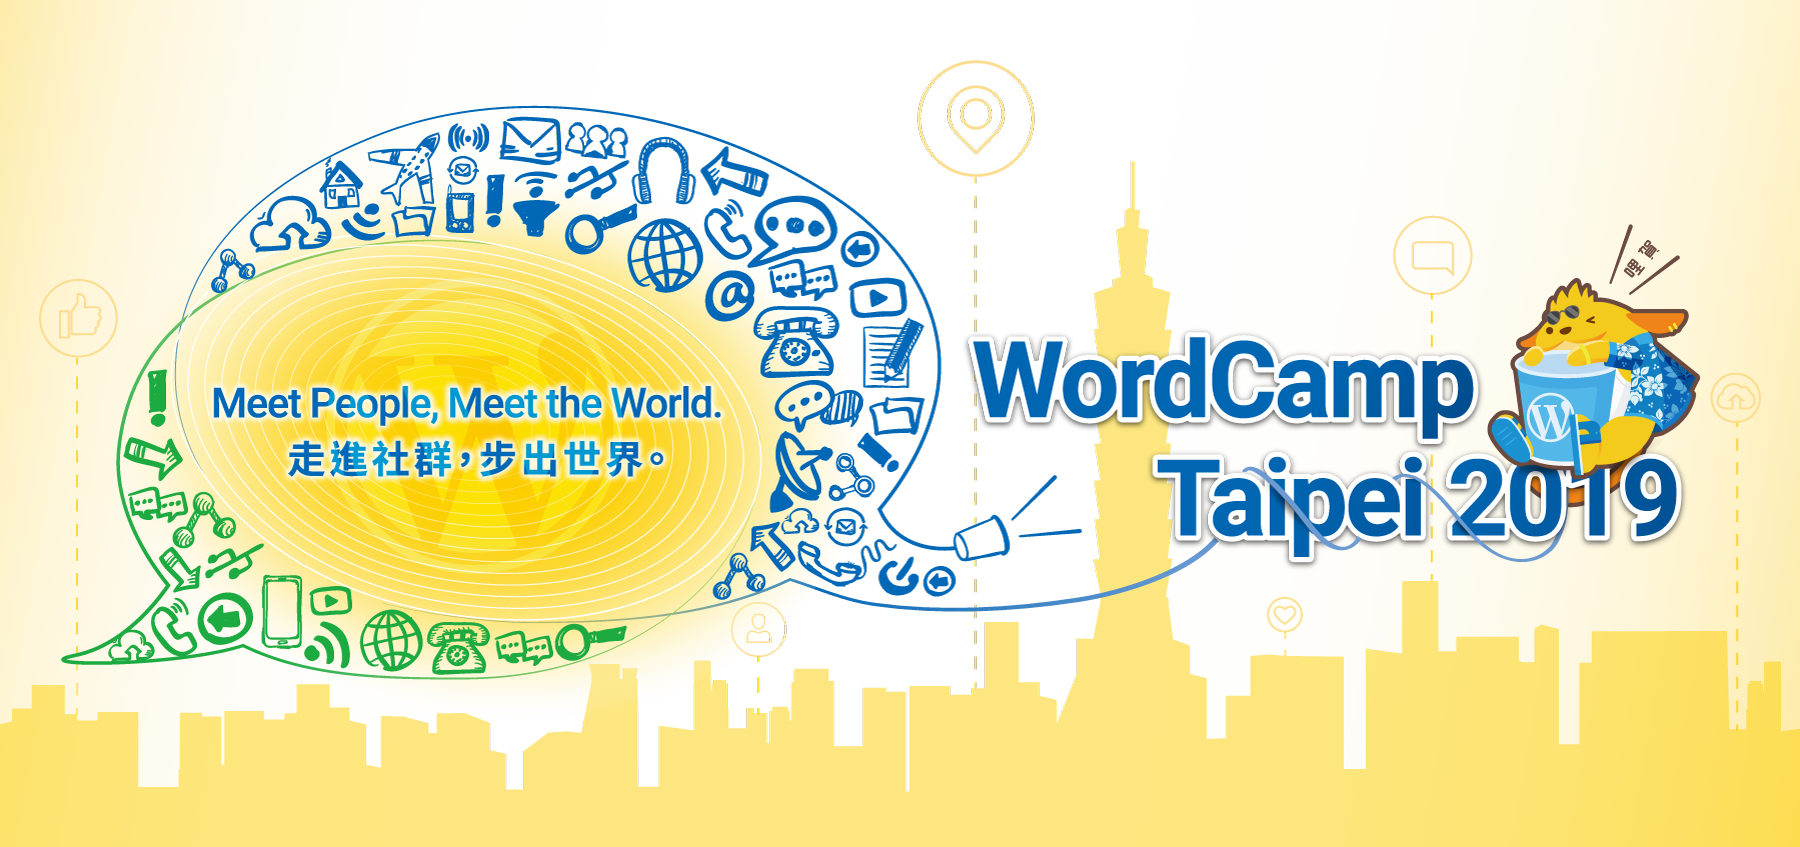 Event cover image for WordCamp Taipei 2019